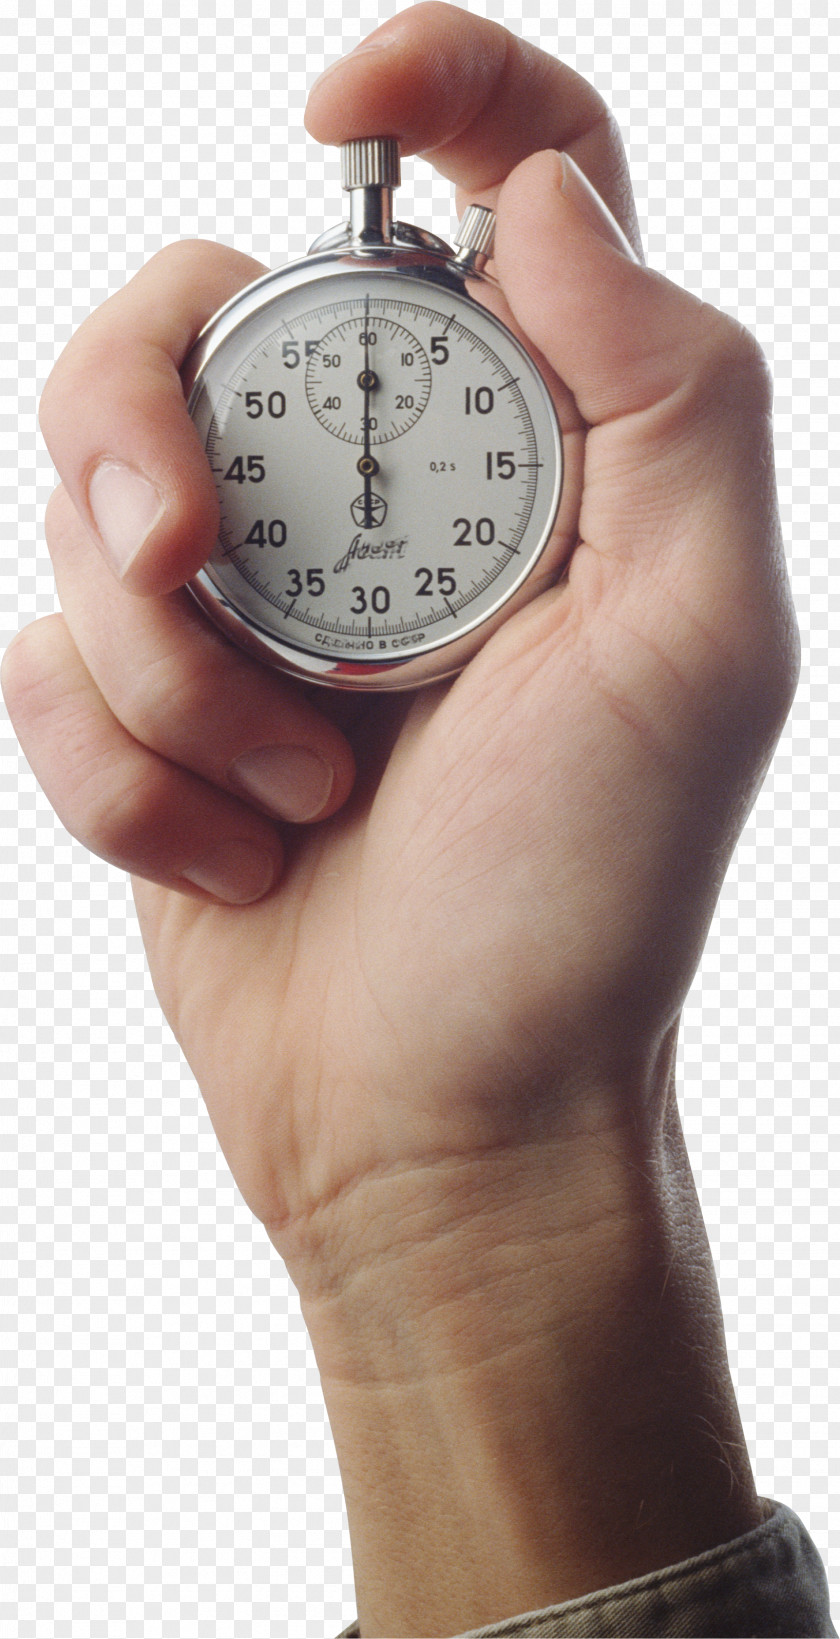 Stopwatch Image File Formats Clip Art PNG